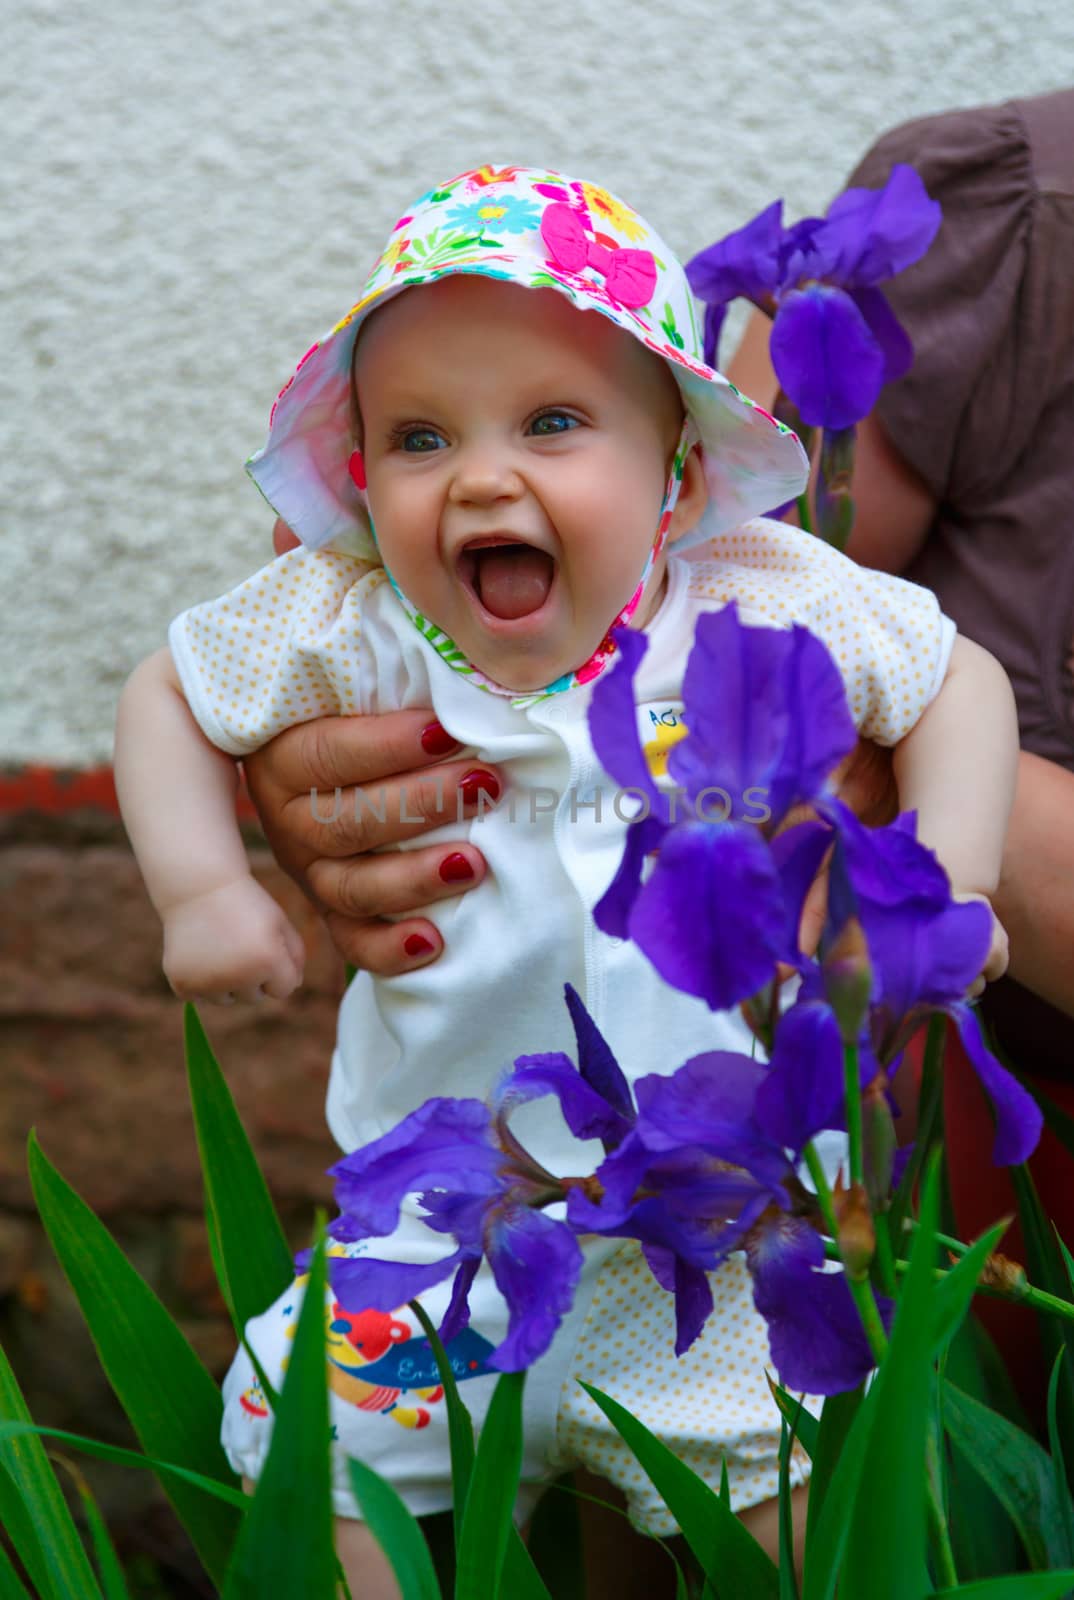 The five-month girl cheerfully laughs, close to the blue irises